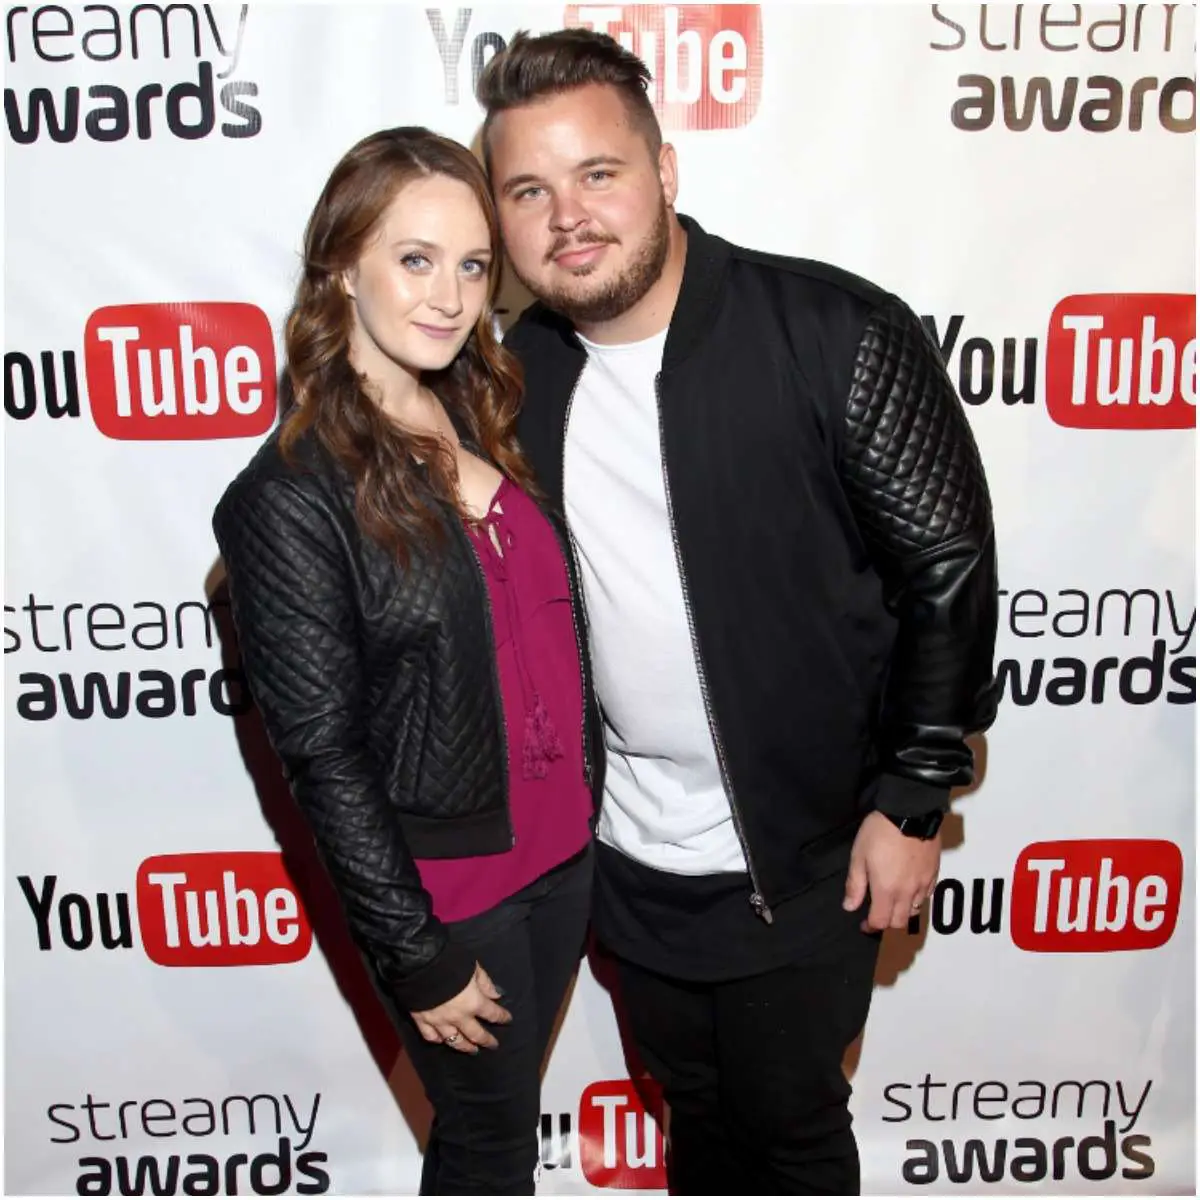 Bryan Lanning and his wife Missy Lanning